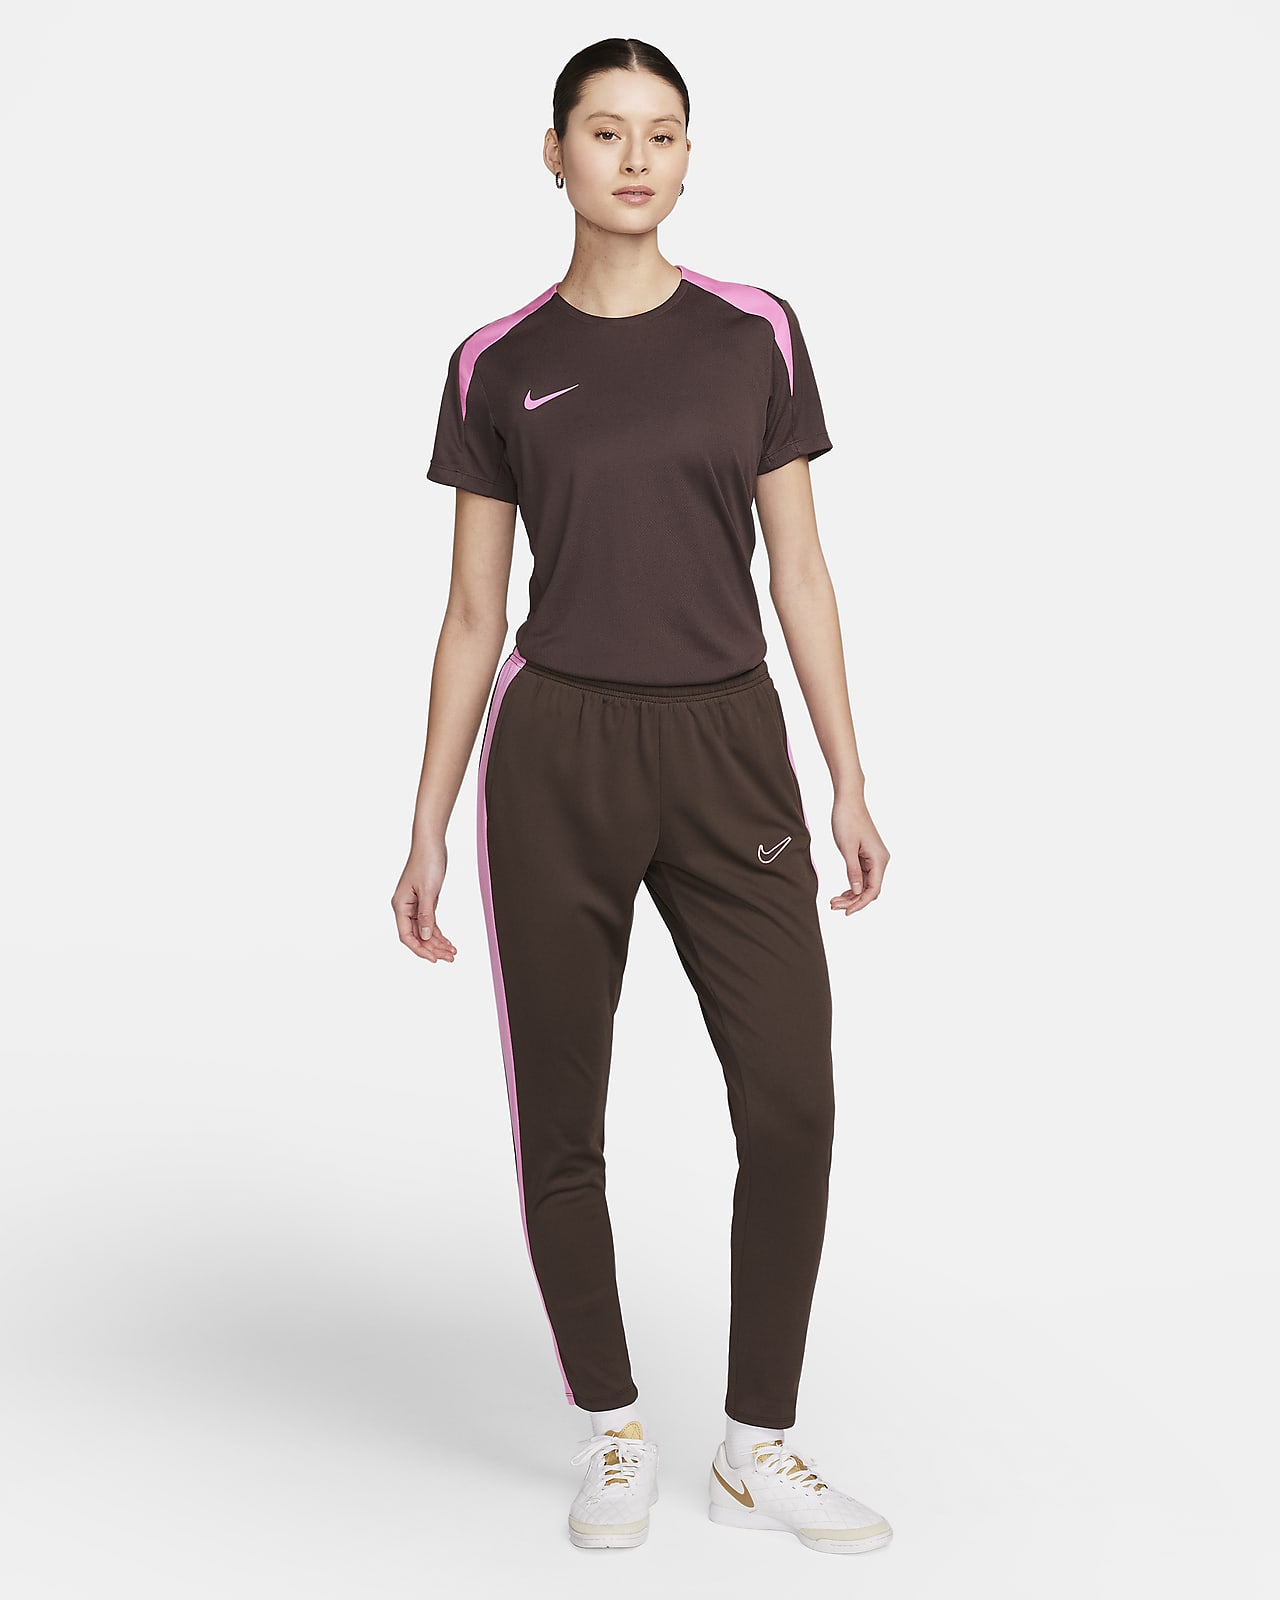 https://static.nike.com/a/images/t_PDP_1280_v1/f_auto,q_auto:eco/2a74086f-85b1-4769-8dc3-e16d1c669066/pants-de-f%C3%BAtbol-dri-fit-academy-x47Q9s.png